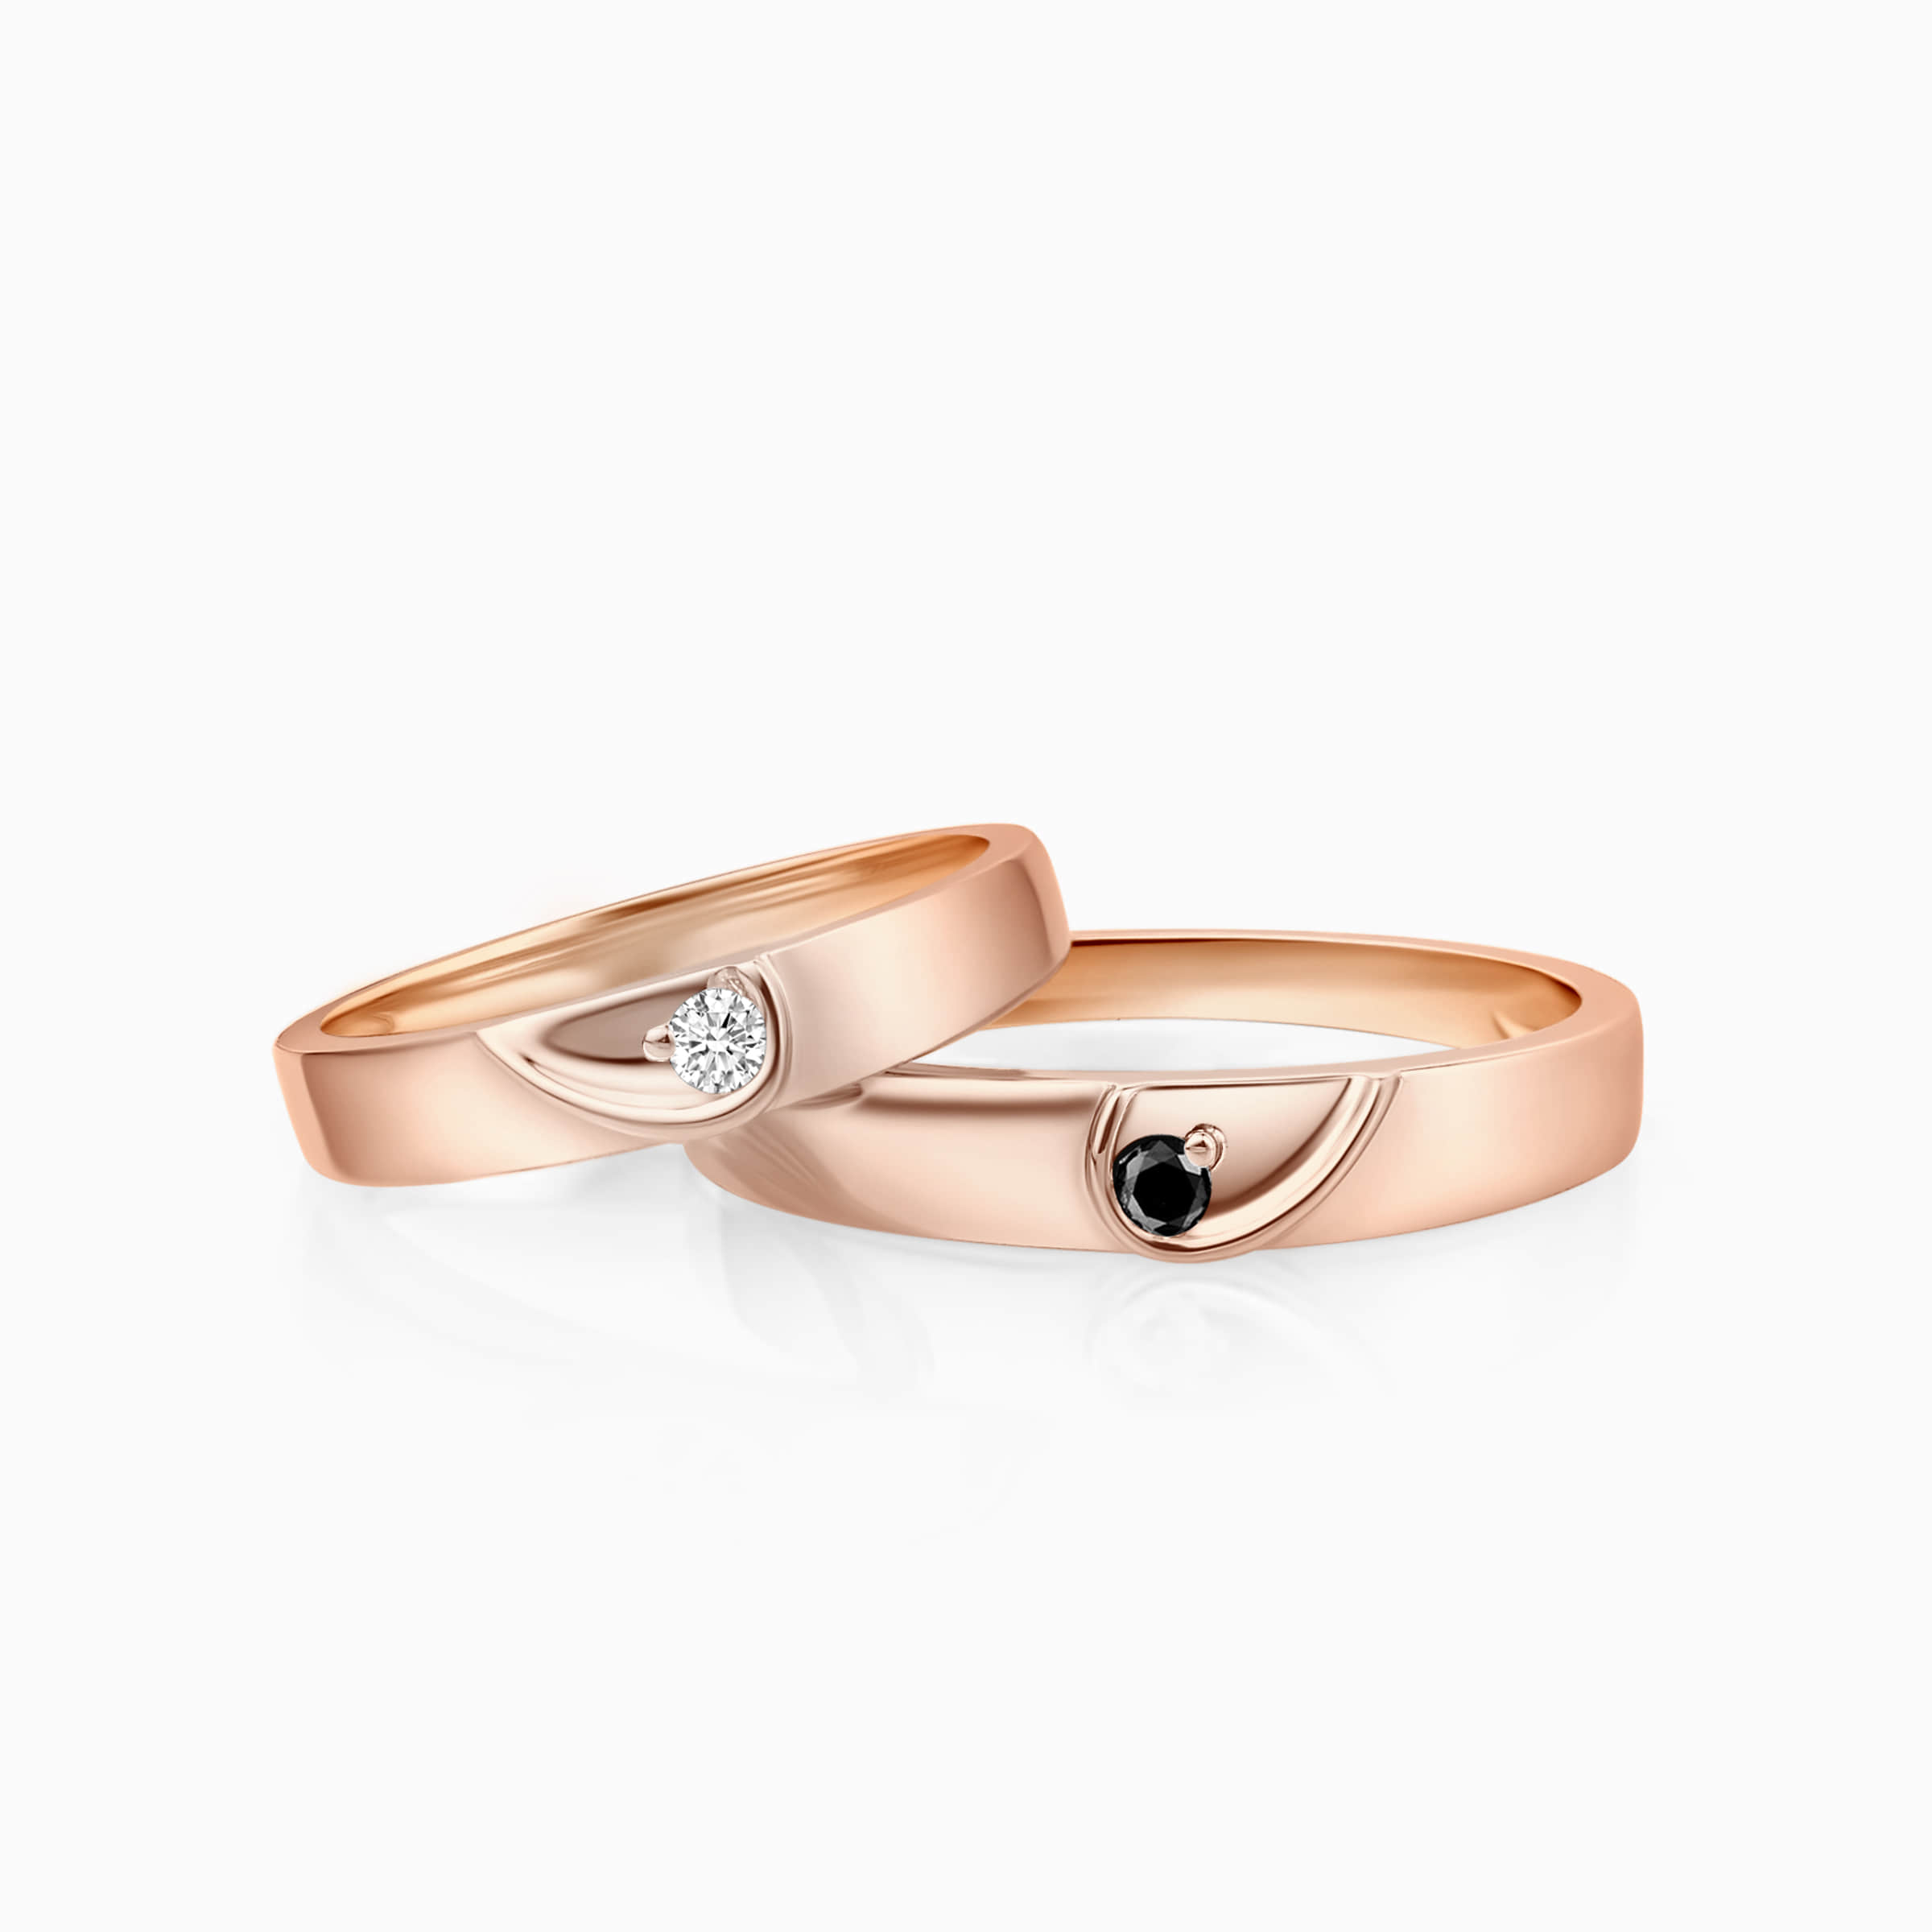 Together We Are One' Wedding Set. Unique half-heart wedding rings. – Gina  Pattison Jewellery